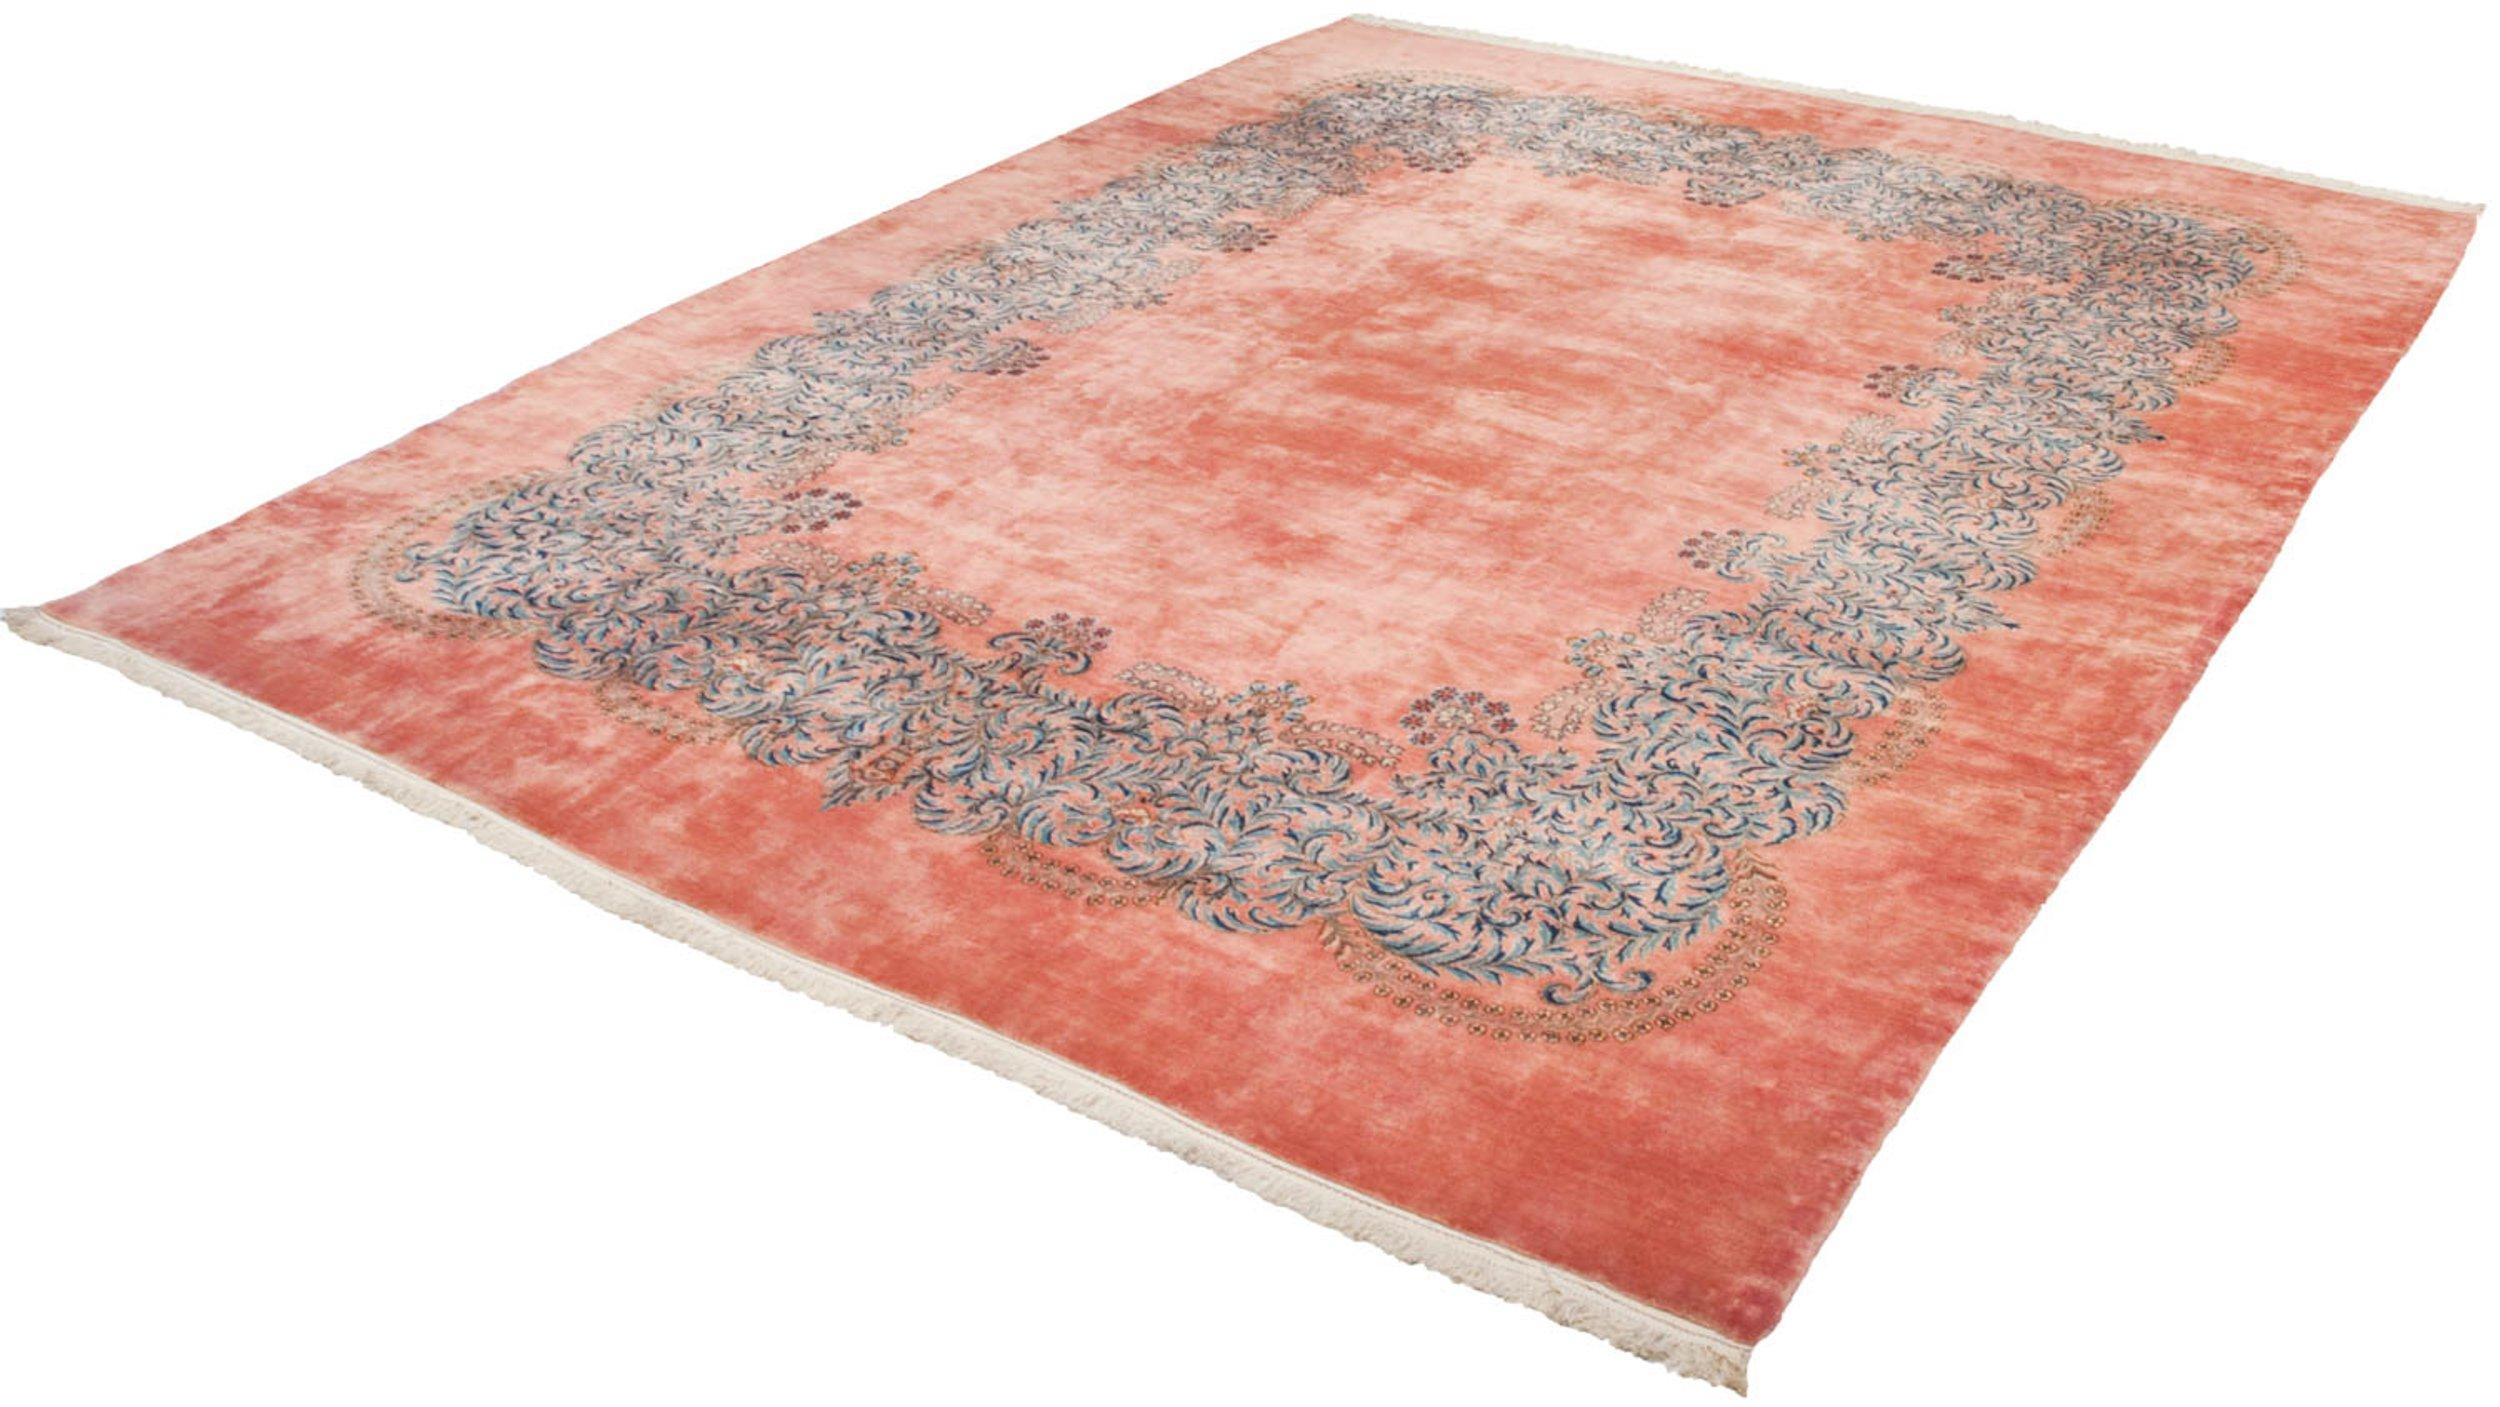 Highly unusual open field with floating oversized scrolling vine main border with European Rococo motif and detailed elongated blossomed stems. Colors and shades include: Dusty rose, pink, sky blue, navy blue, cochineal red, and more. Condition